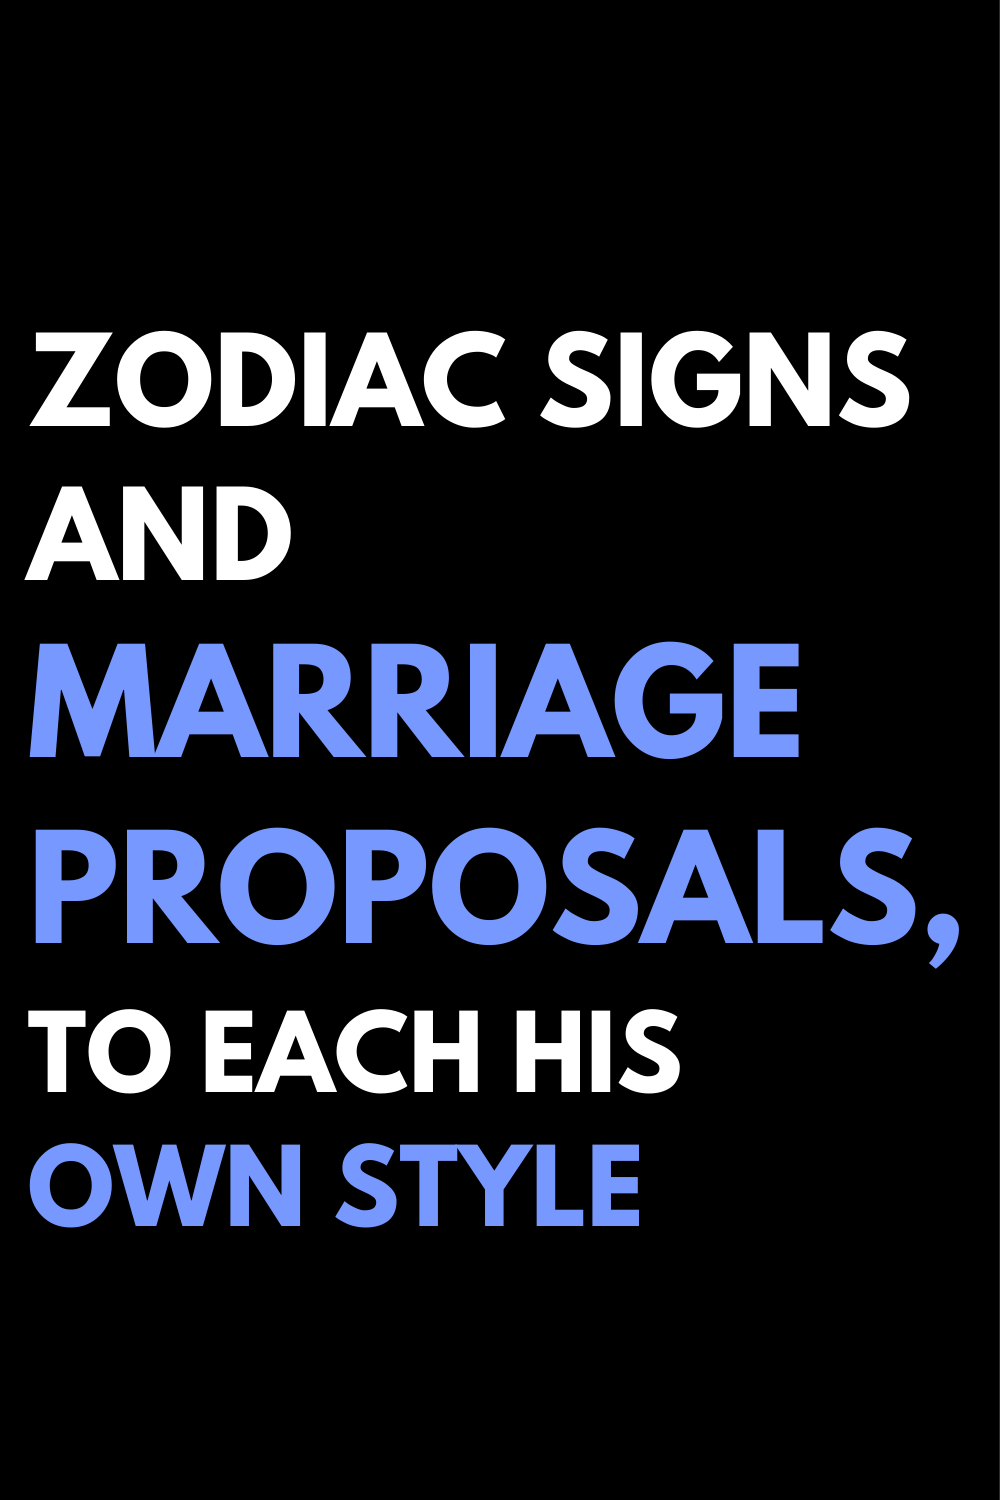 Zodiac signs and marriage proposals, to each his own style